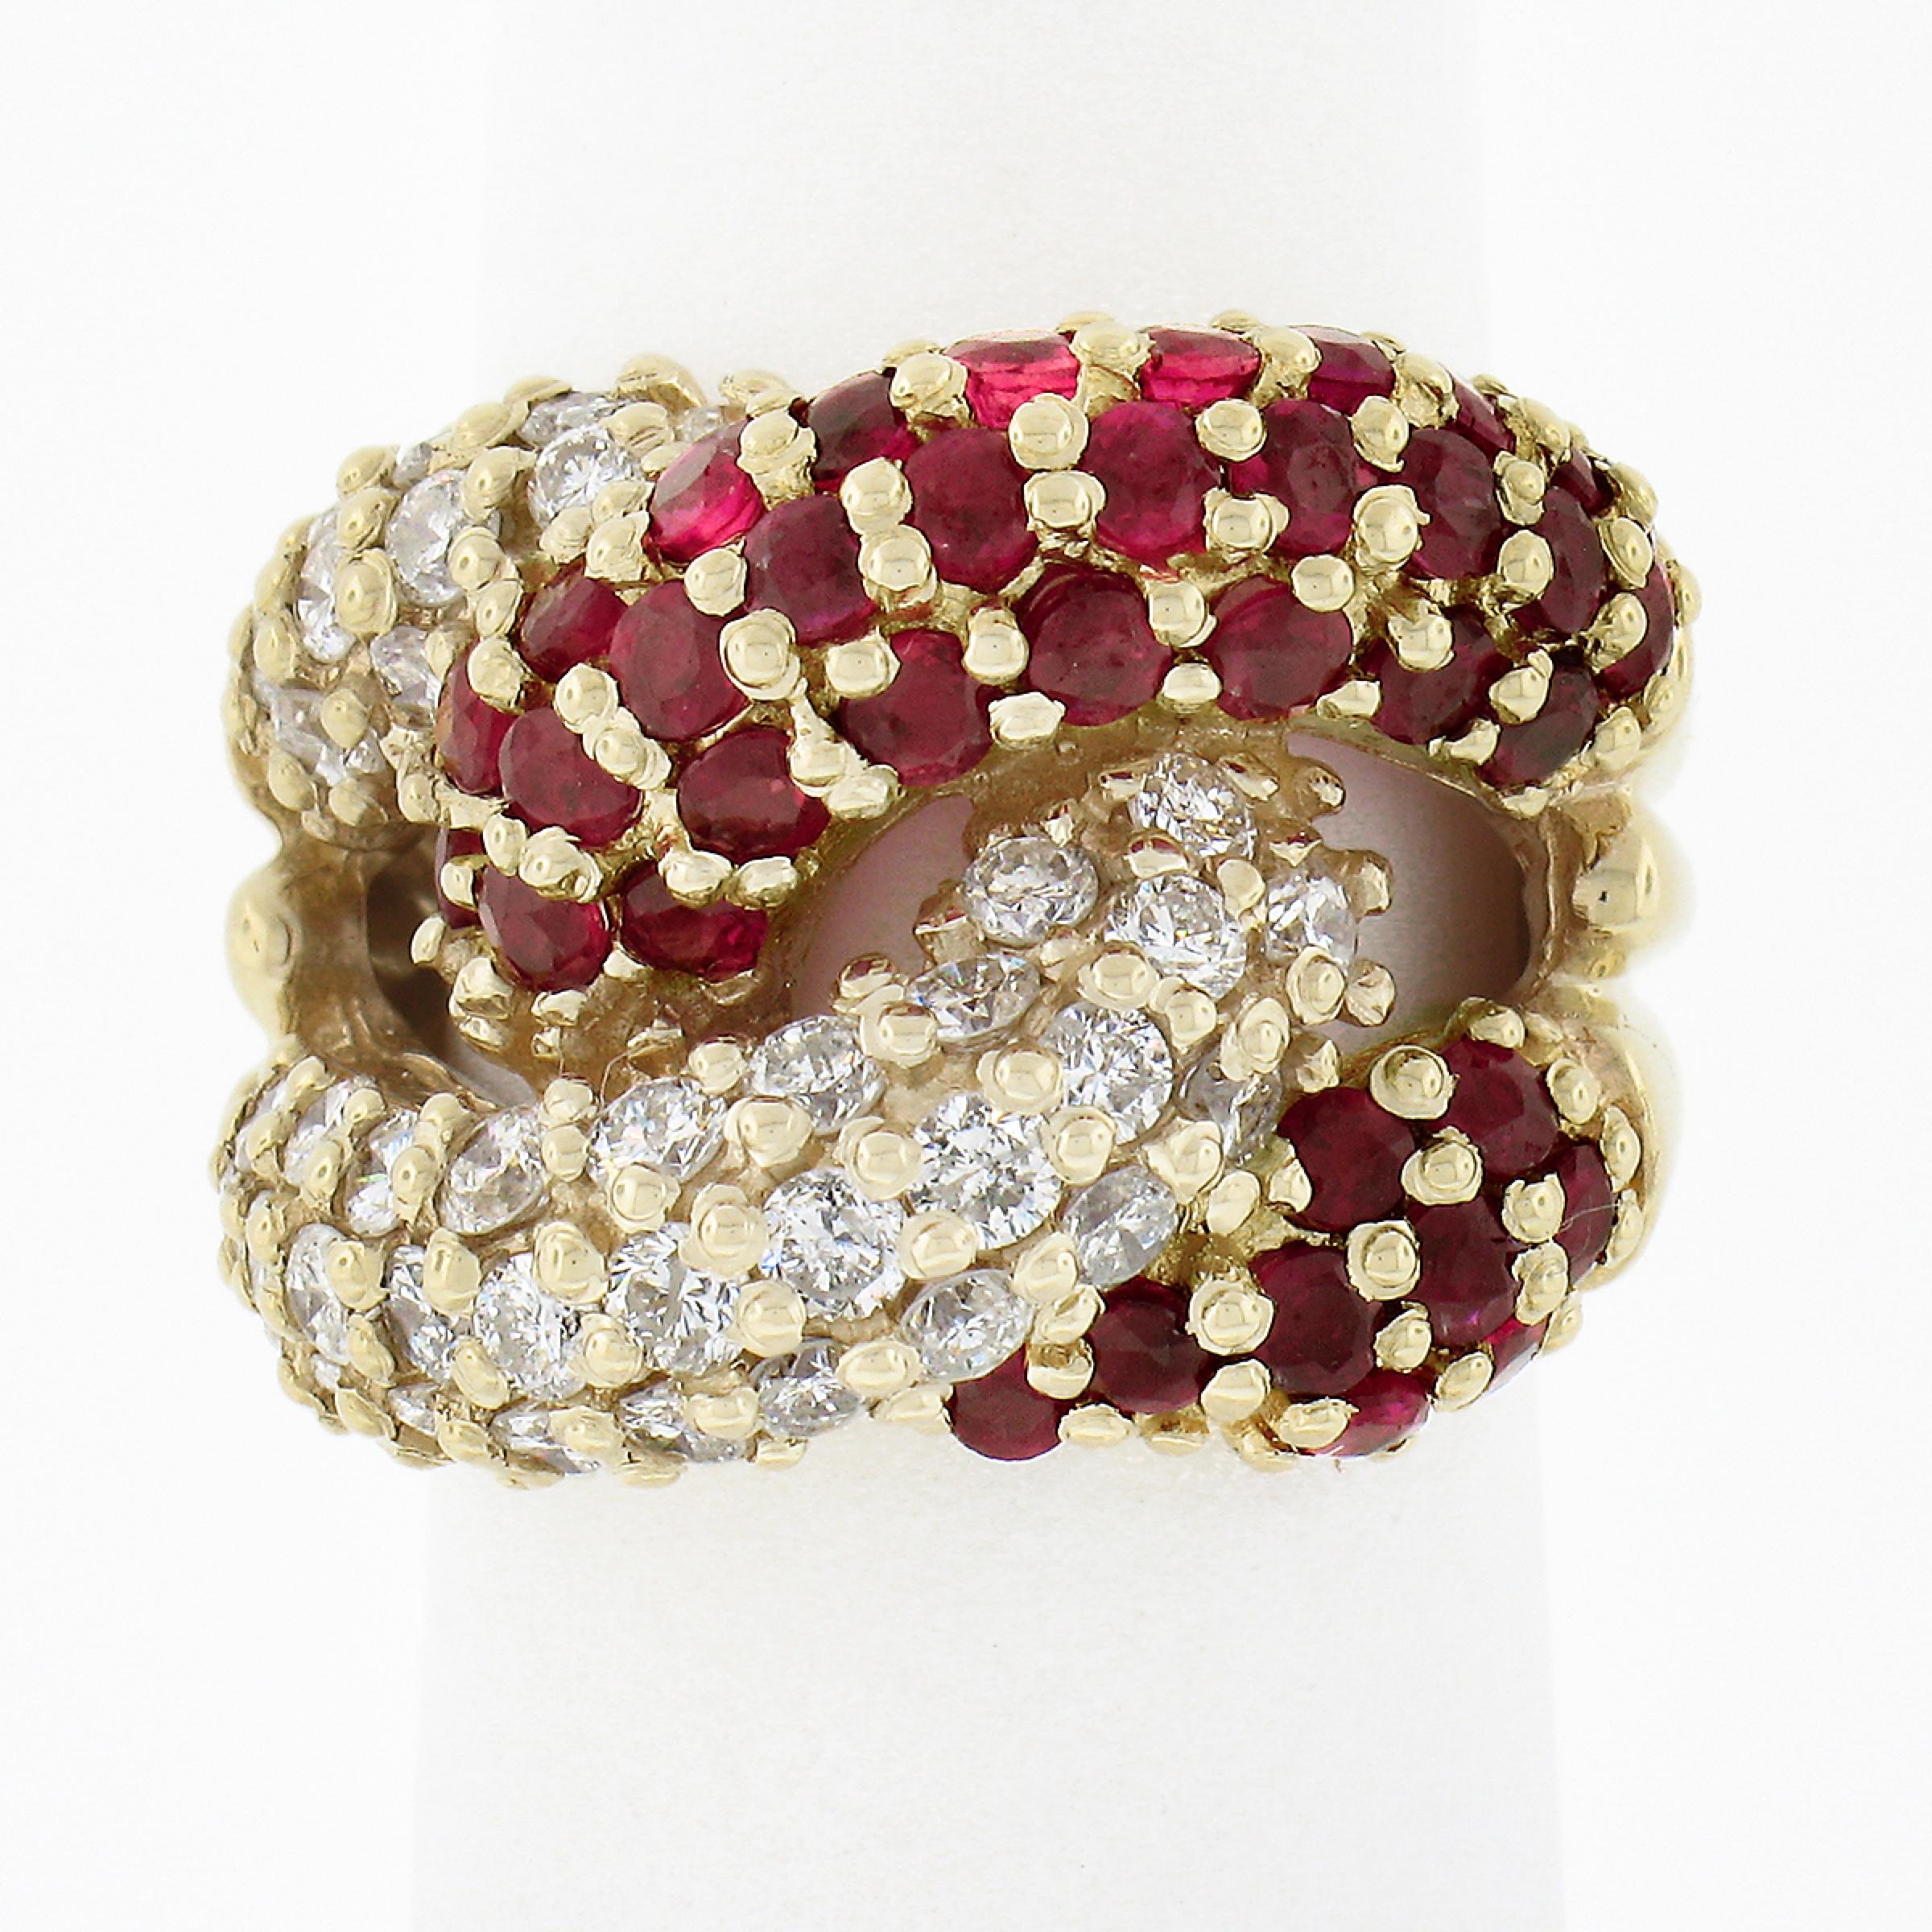 This gorgeous wide band ring was crafted in solid 14k yellow gold and features a puffed and interlocking loop design that is neatly prong set with round brilliant cut diamonds and rubies throughout. The fine rubies are set on one loop showing a deep